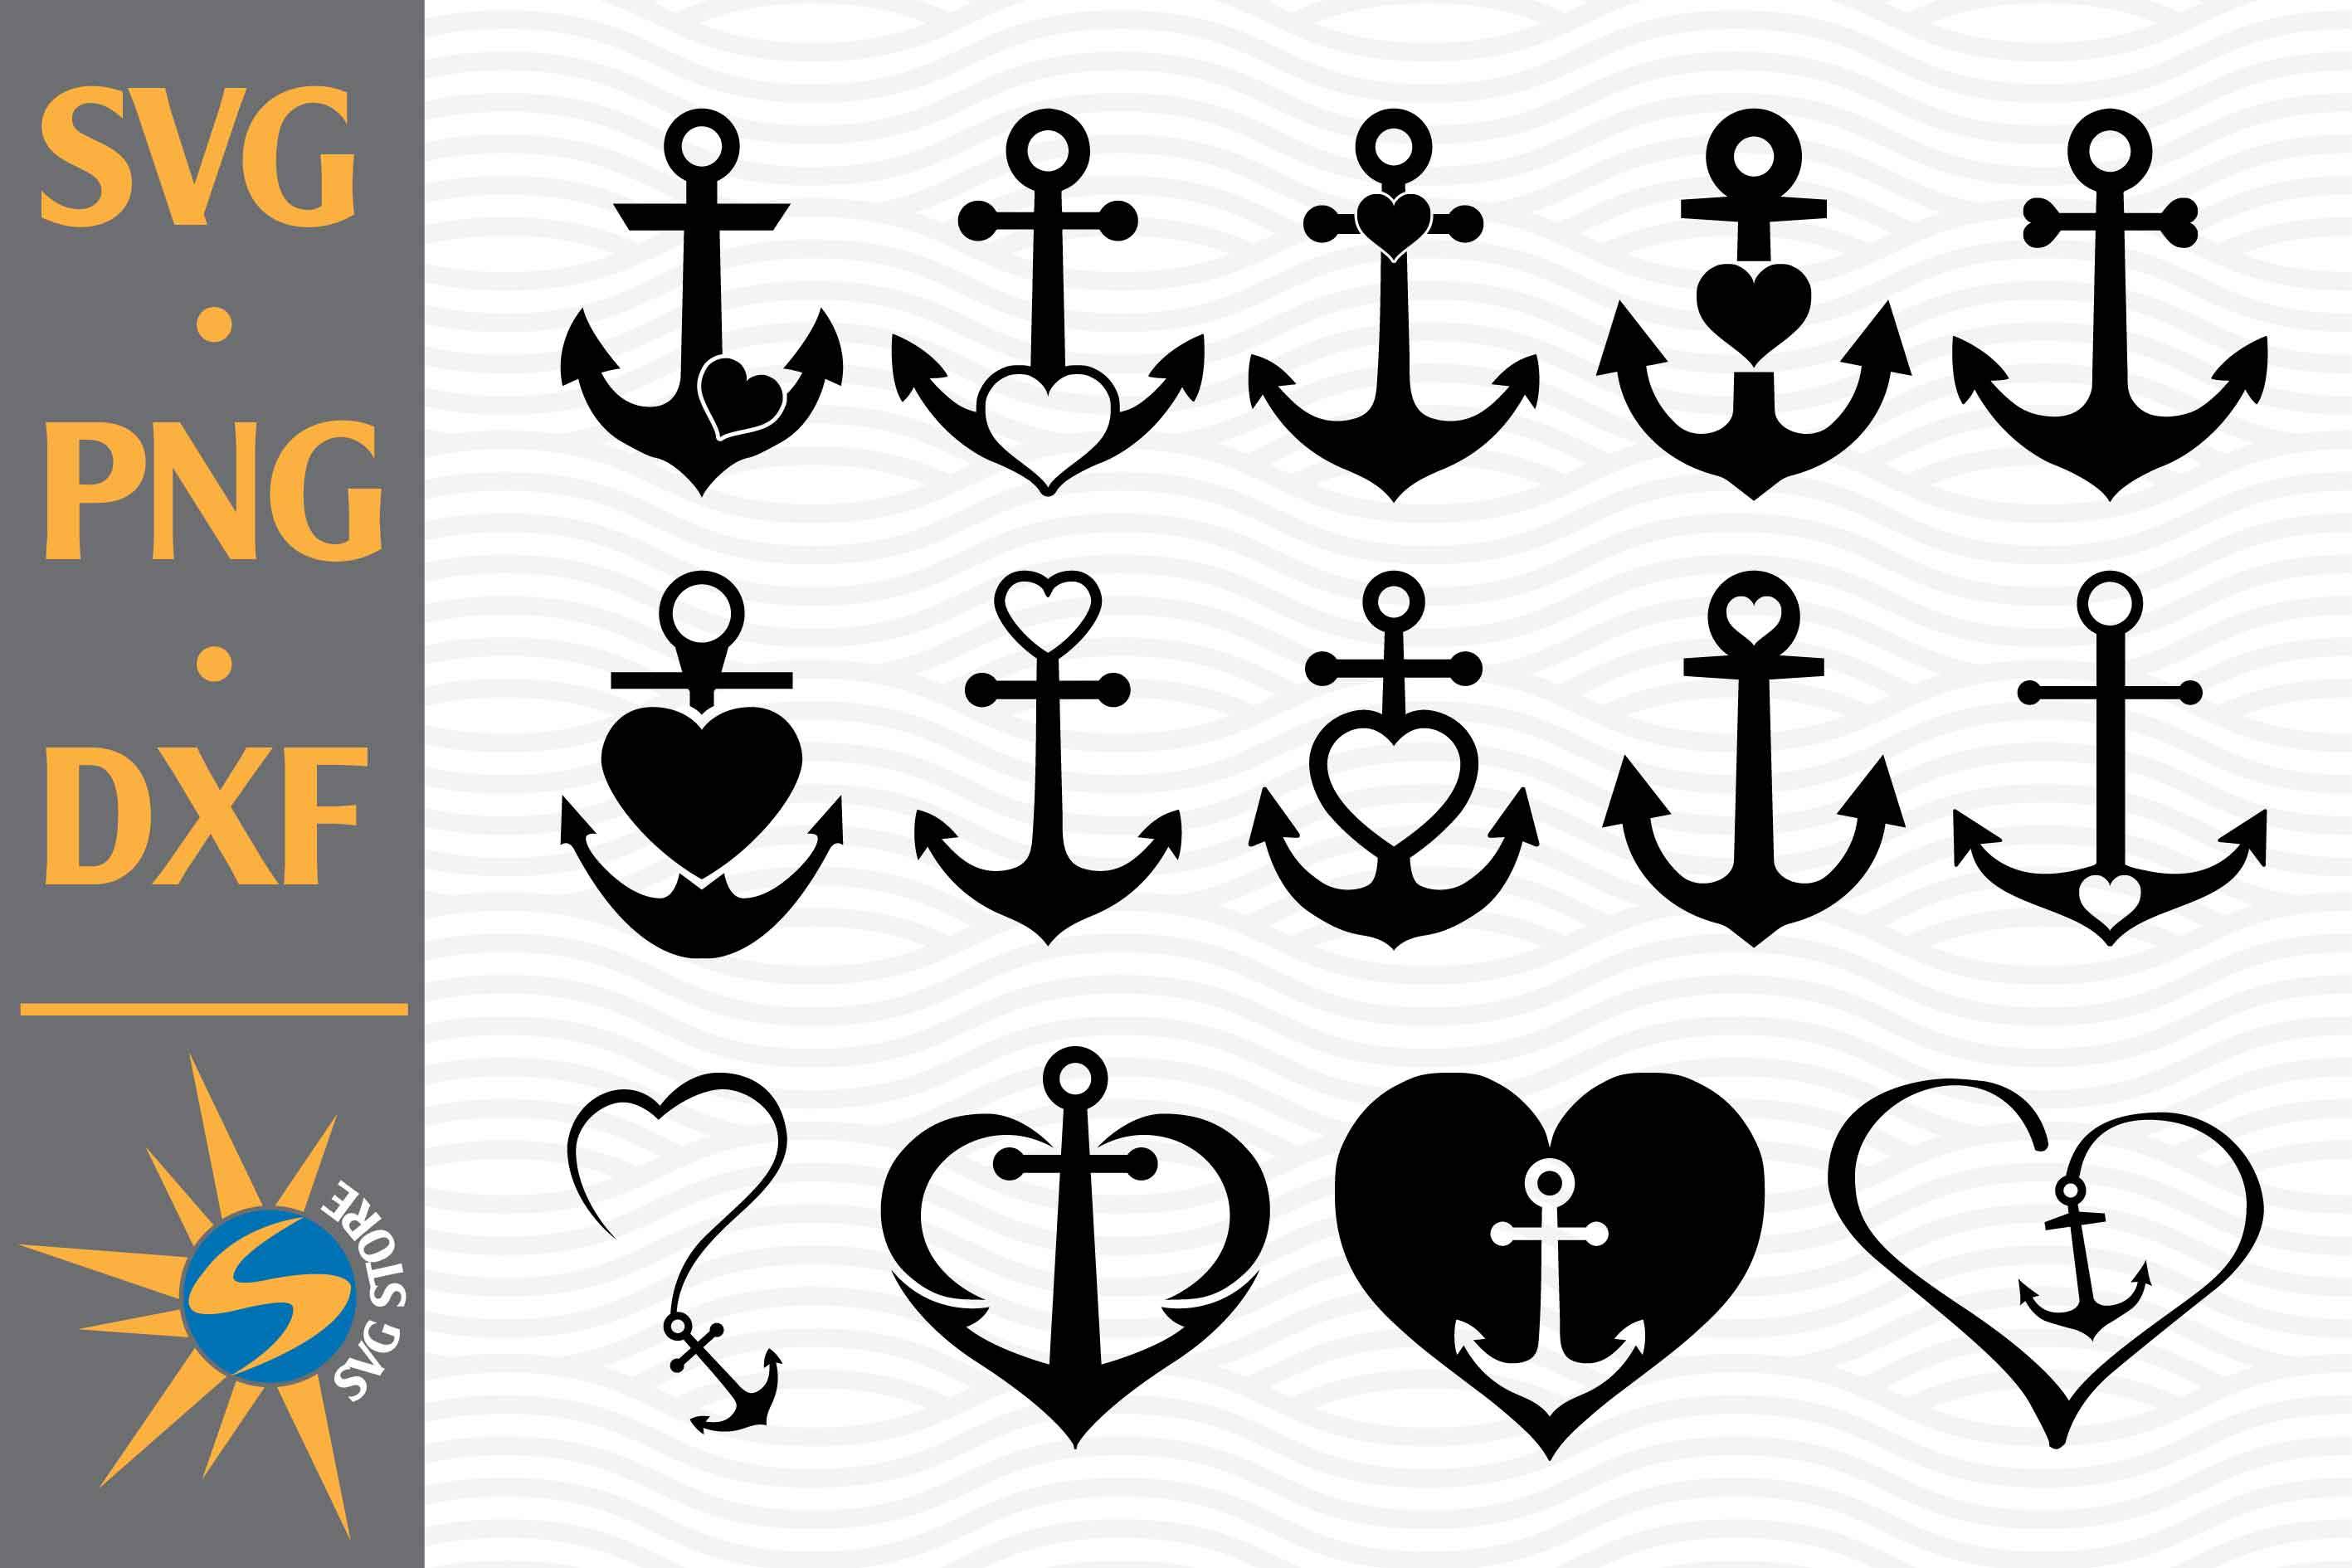 Download Art Collectibles Clip Art Anchor Printable Images Anchor Svg Cut File Anchor Svg Png Dxf Anchor Clipart Anchor Dxf Files Anchor Clip Art